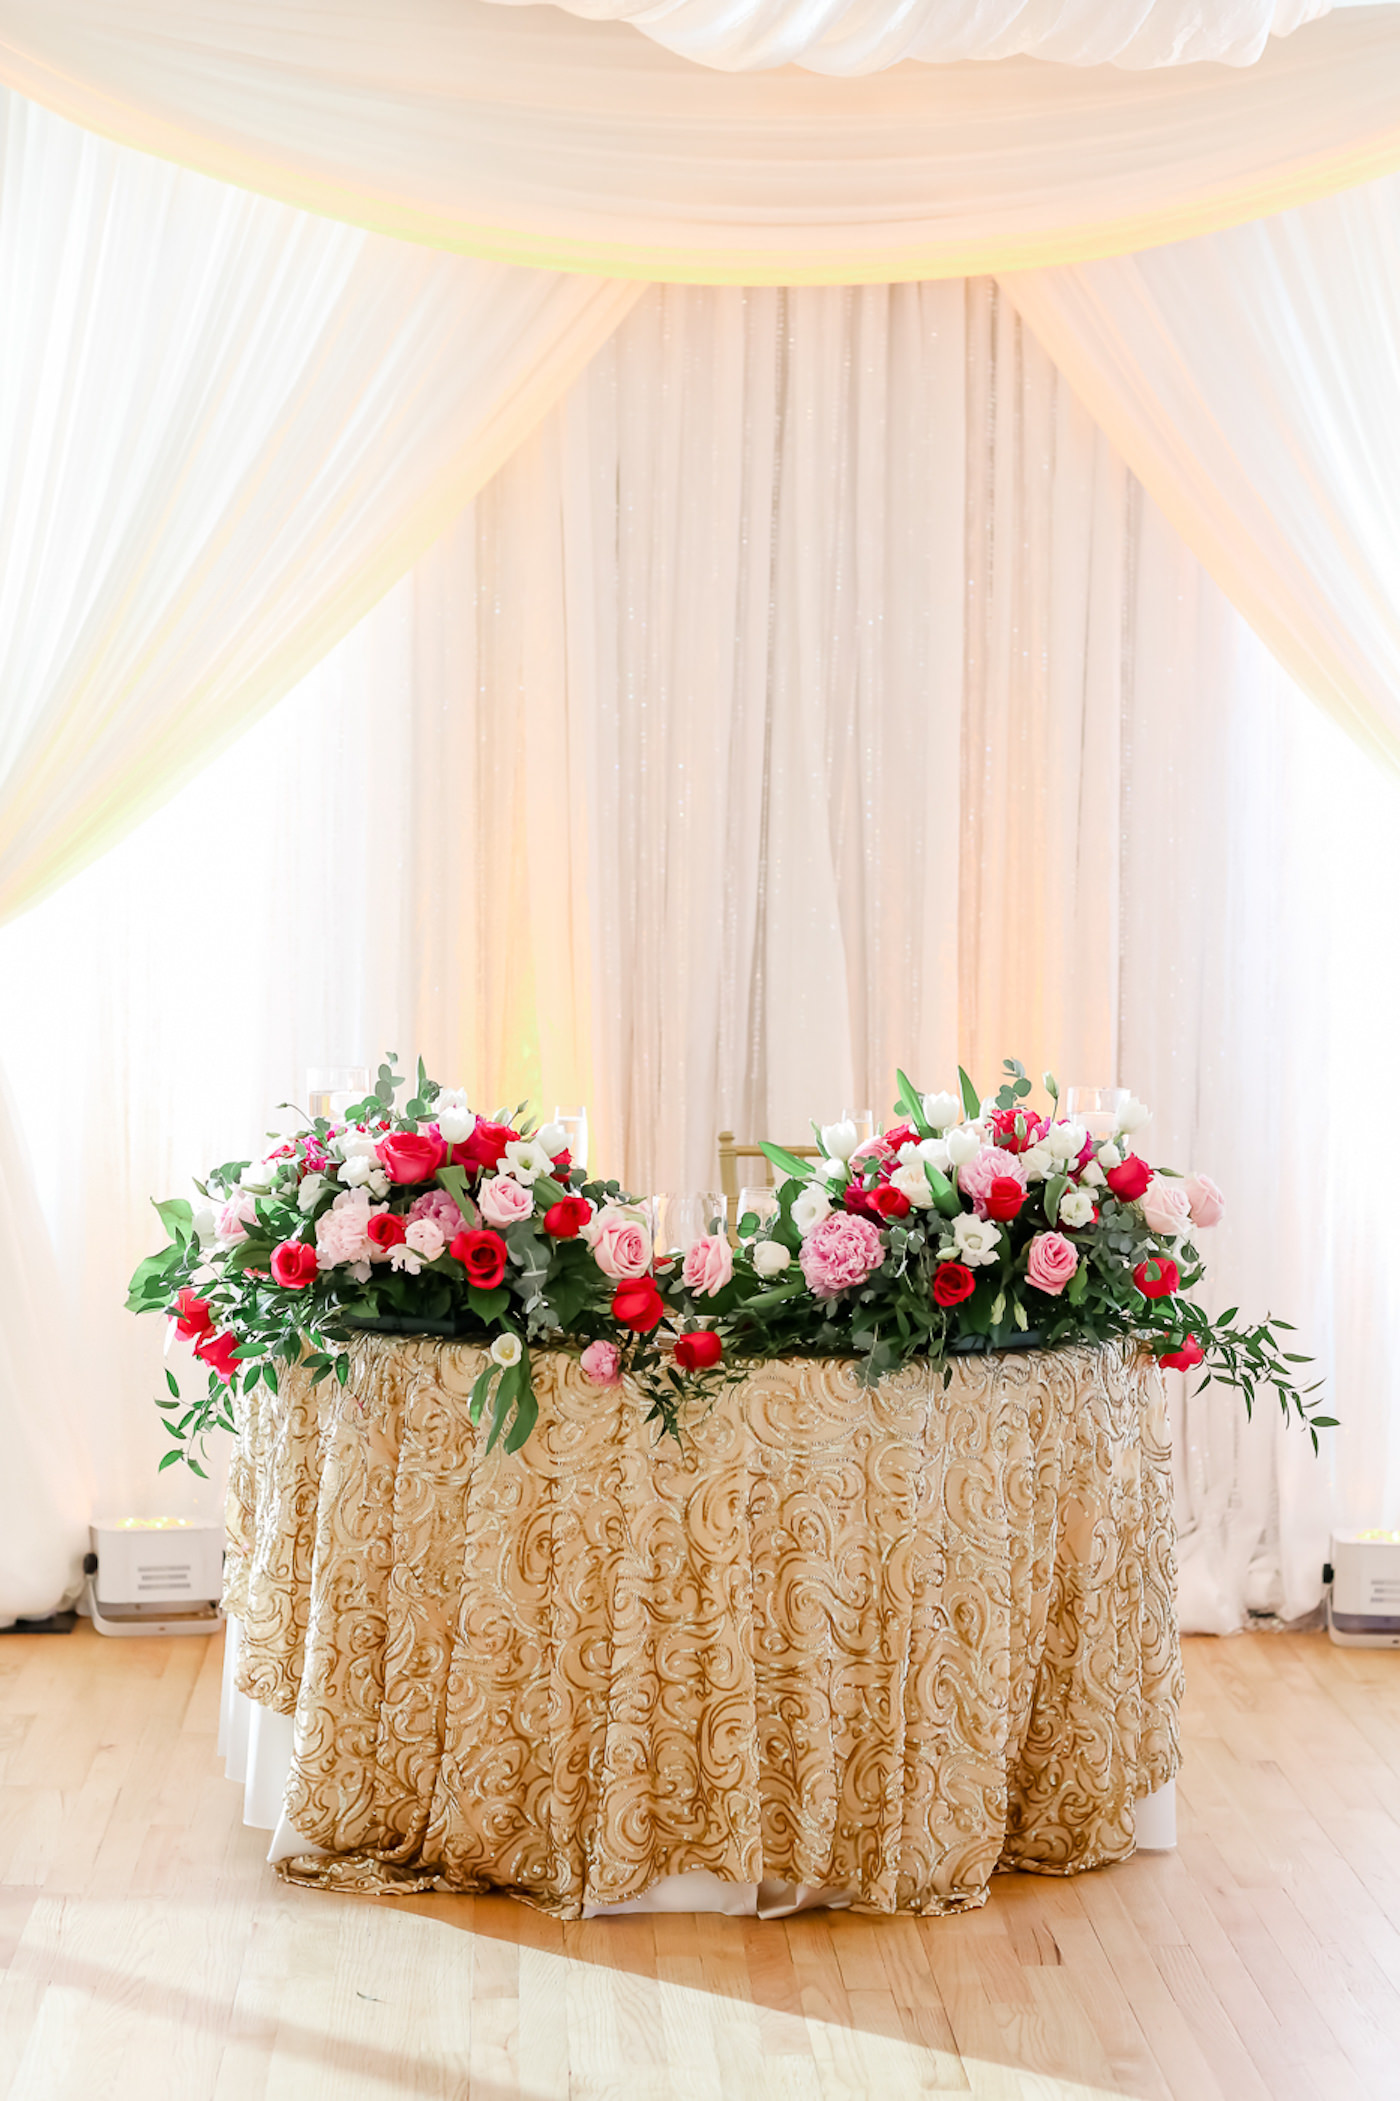 Wedding Reception Decor, Sweetheart Table with Gold Swirl Sequins Linen, Pink, Blush and White Roses and Greenery Floral Arrangement with White Backdrop Draping | Tampa Bay Wedding Photographer Lifelong Photography Studios | Wedding Rentals Over the Top Linens